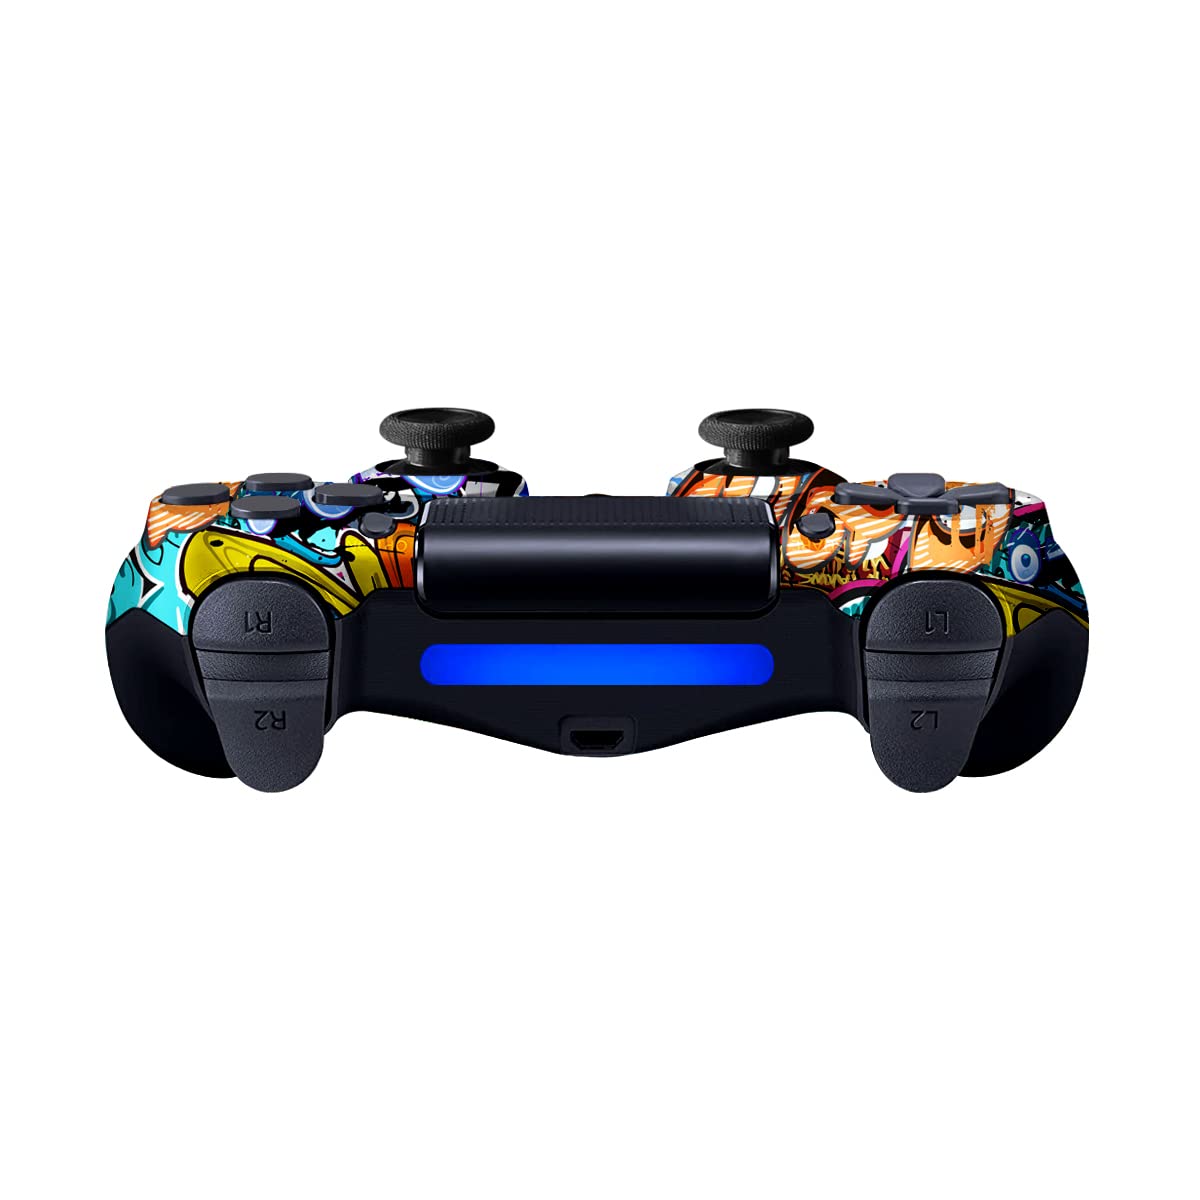 TIANHOO Wireless Controller Compatible with PS4/Slim/Pro with Dual Vibration/6-Axis Motion Sensor/Audio Function